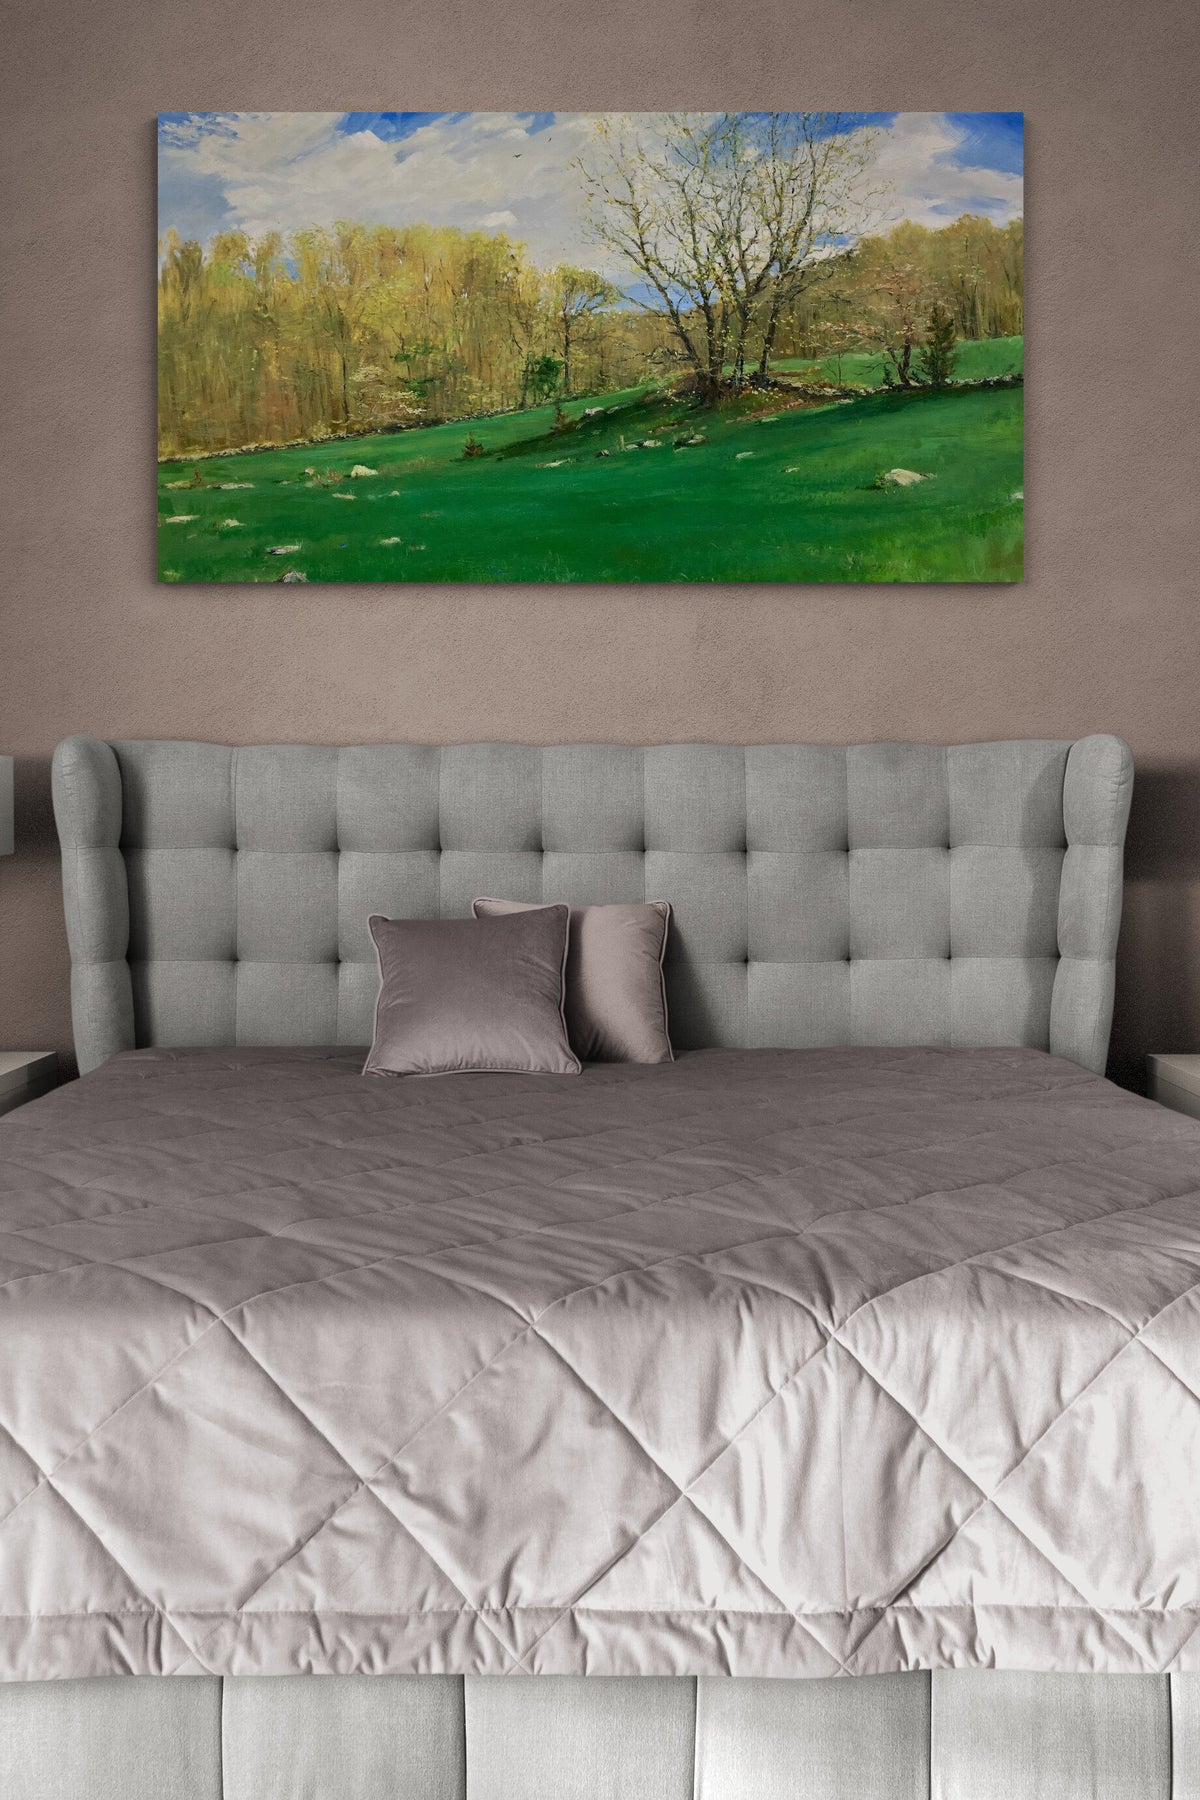 Contemporary Field Landscape Painting captures nature in this luxurious bedroom